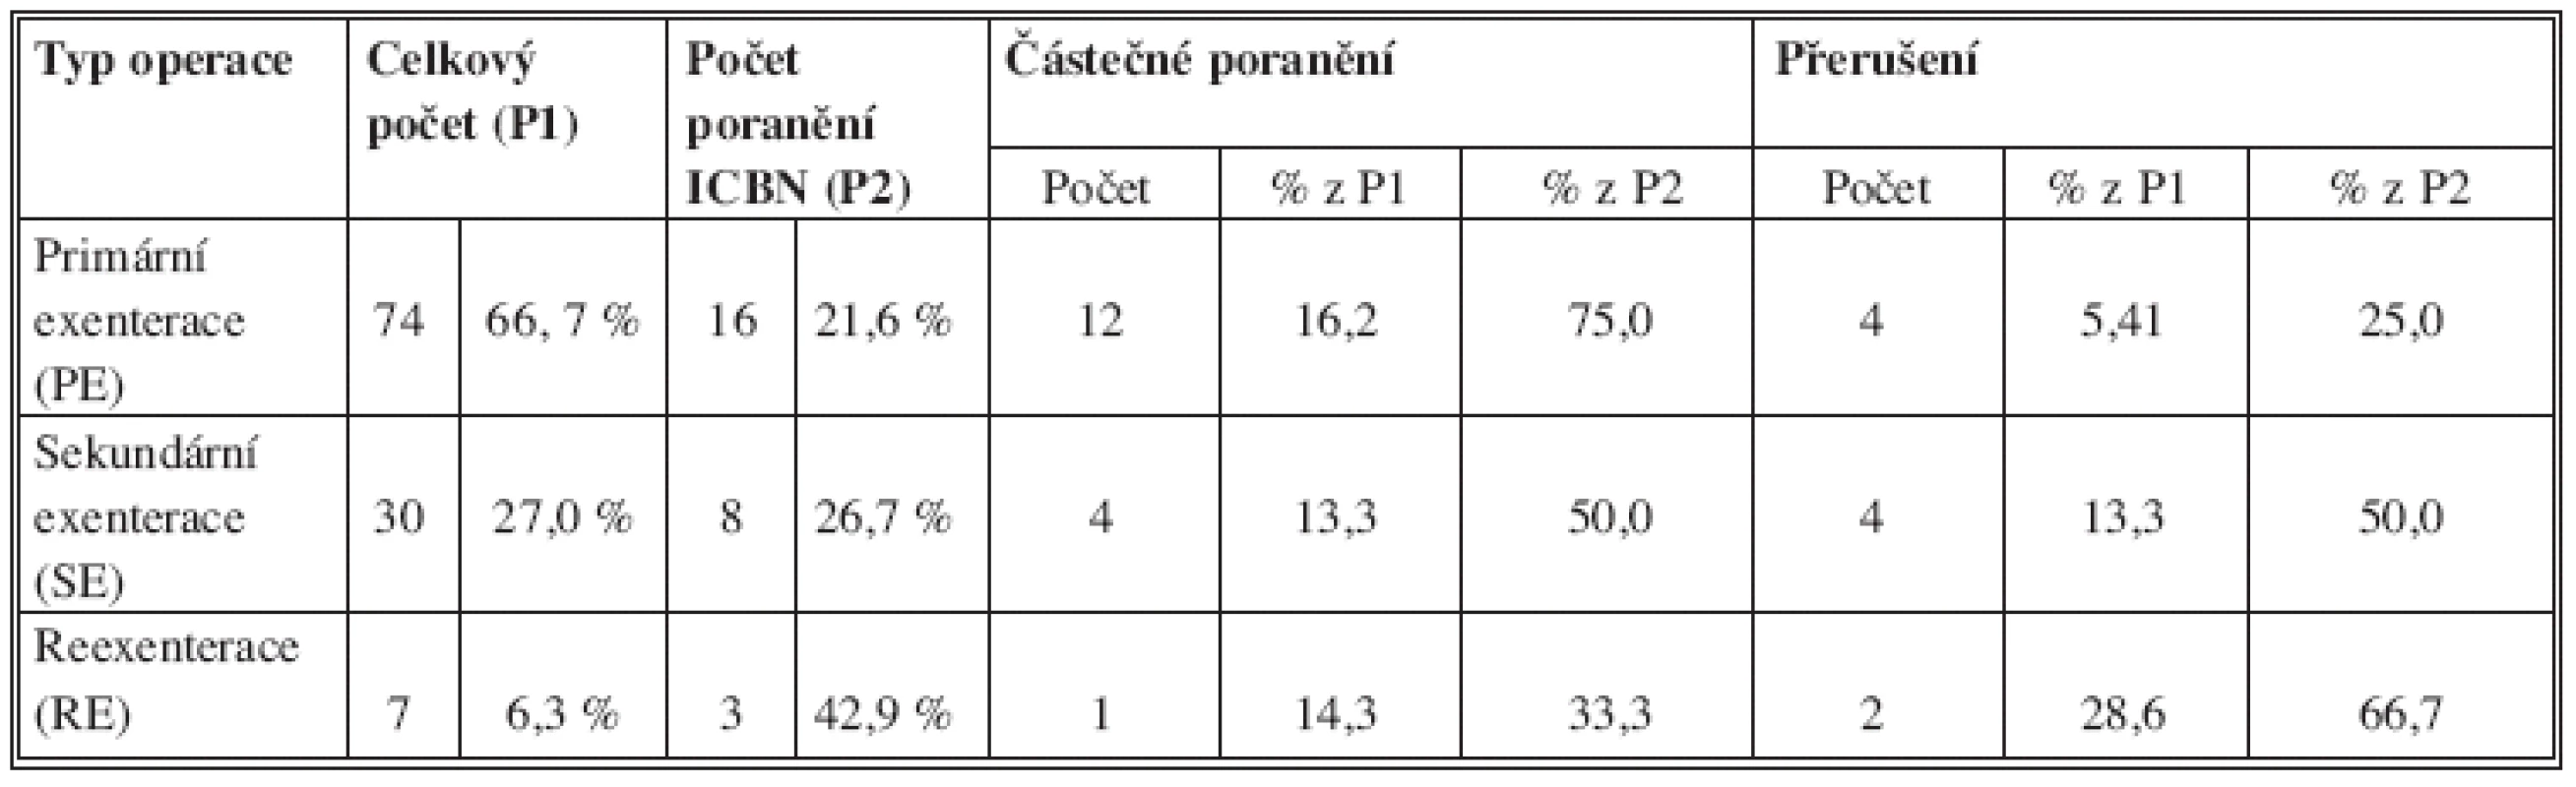 srovnání typu operace a rizika poranění ICBN
Tab. 7: comparison of the type of surgery and the risk of injury to the ICBN